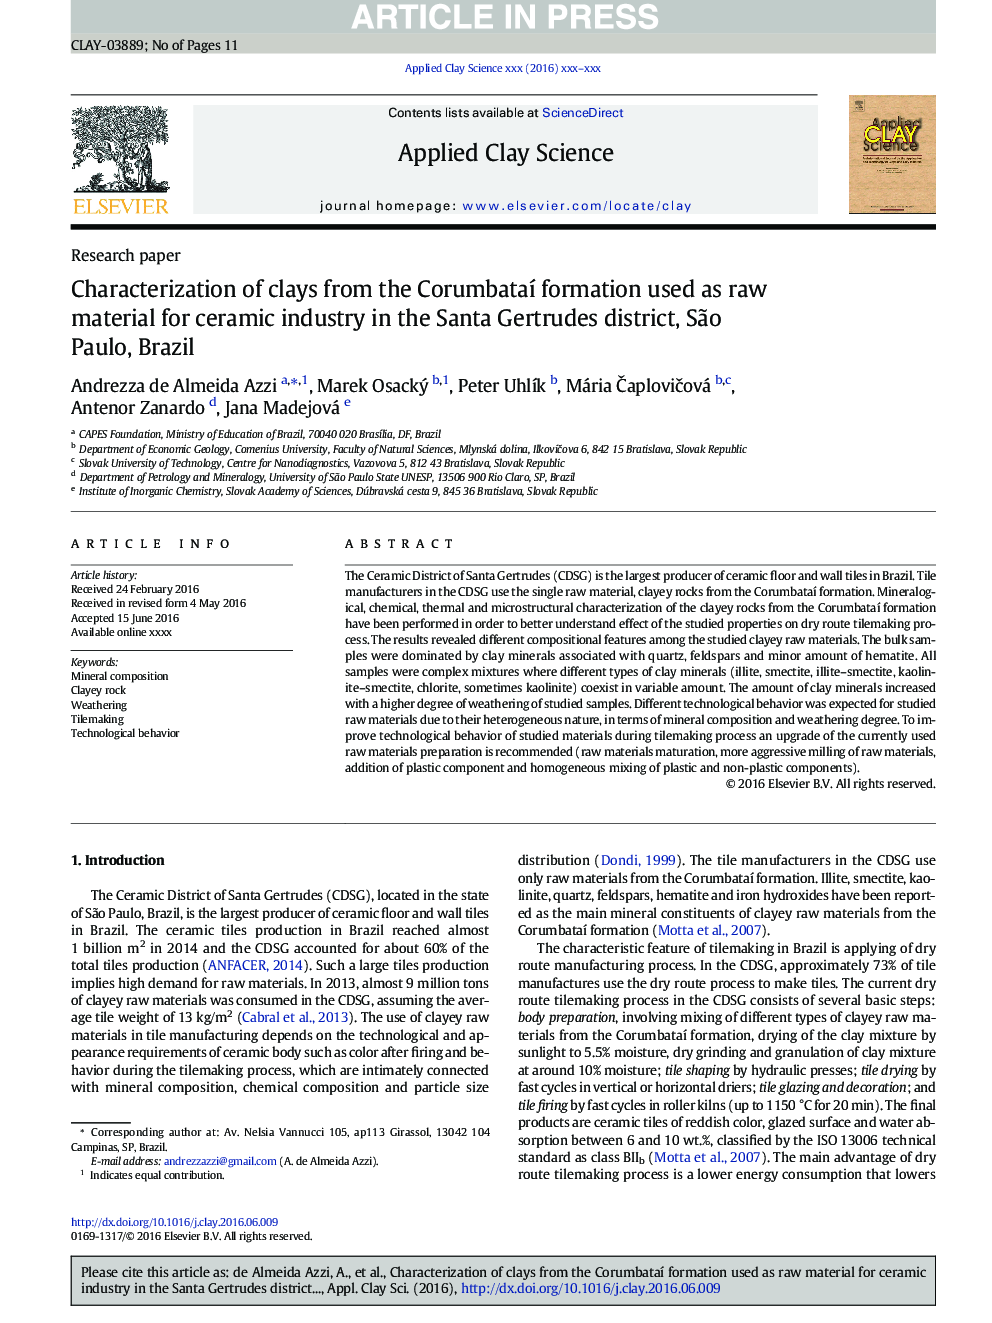 Characterization of clays from the CorumbataÃ­ formation used as raw material for ceramic industry in the Santa Gertrudes district, SÃ£o Paulo, Brazil